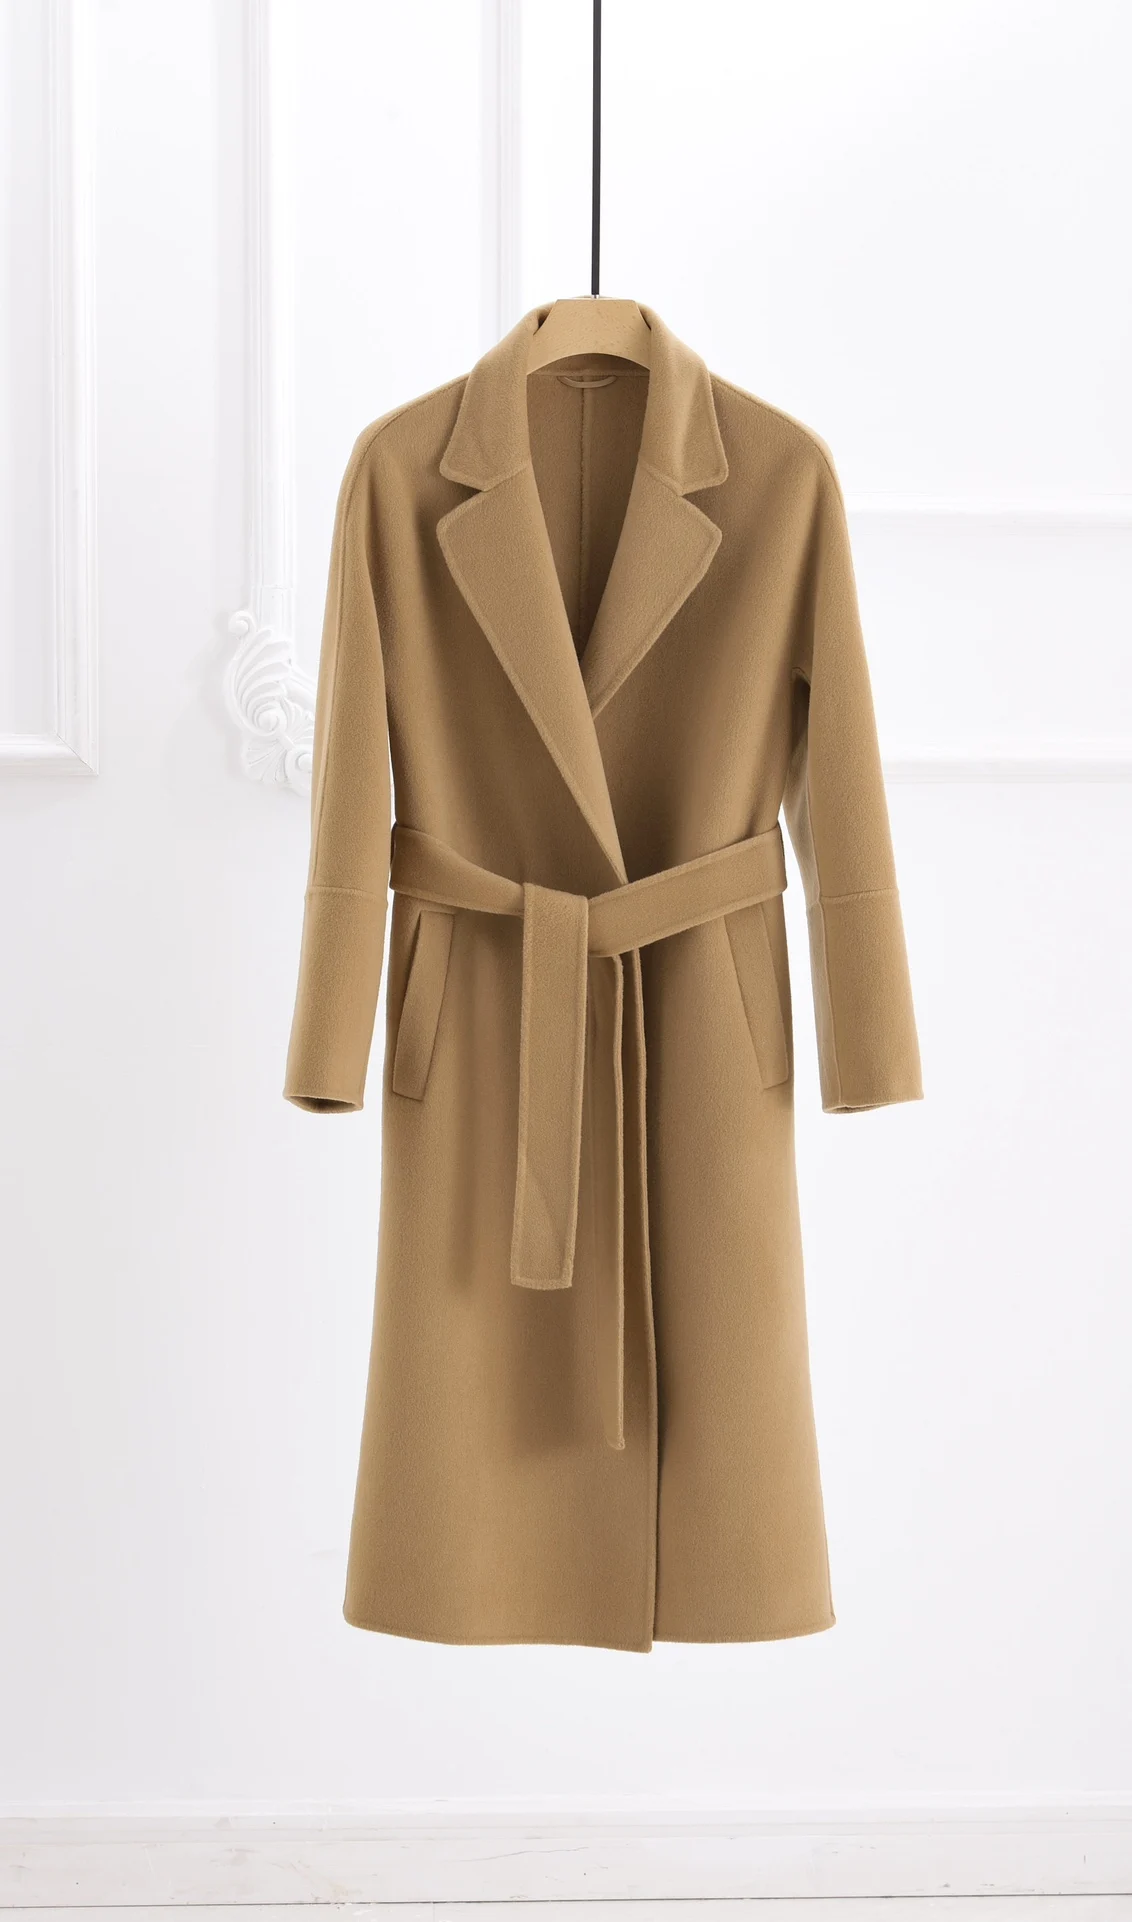 

New autumn and winter hand-stitched double-sided cashmere coats with long lapels and stickers designed in khaki